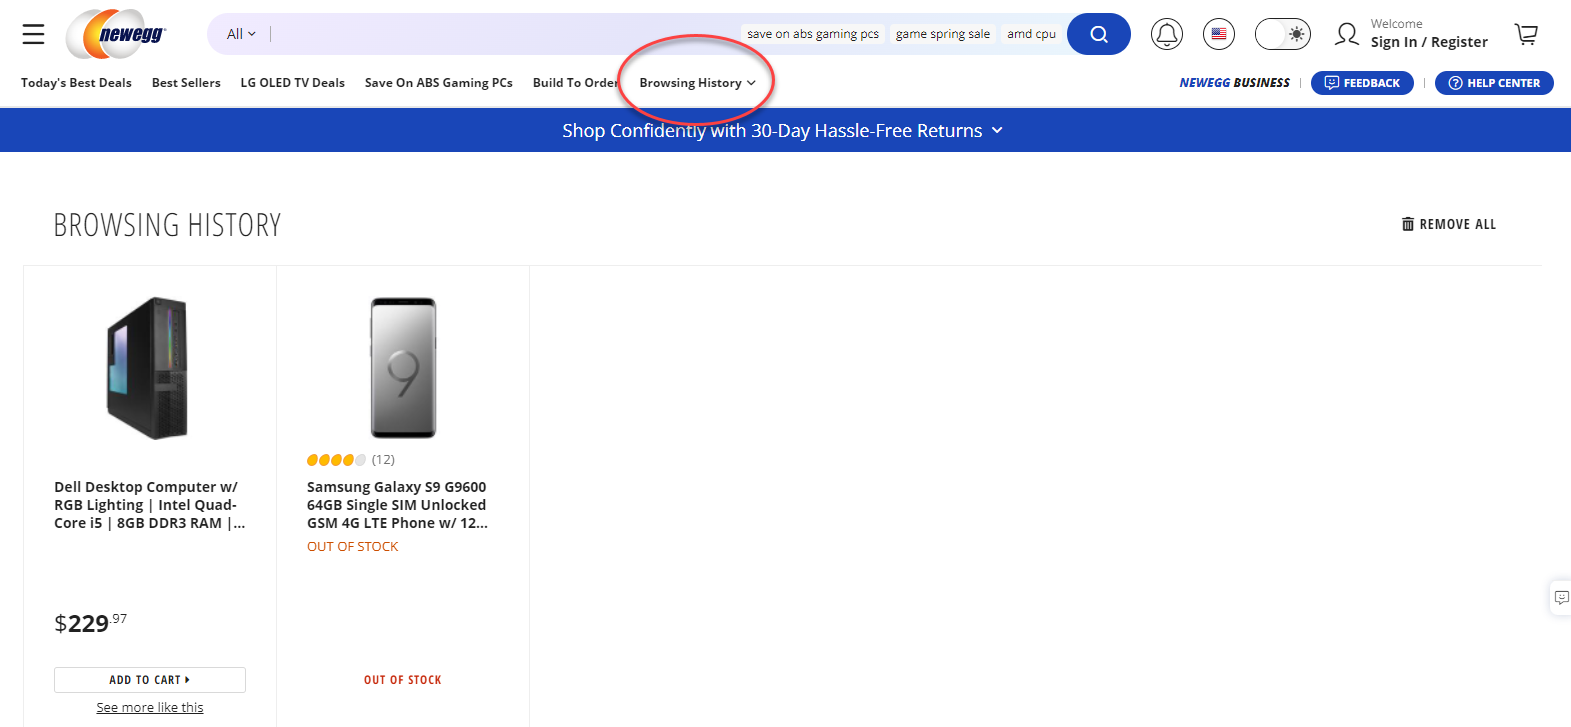 Screenshot of product links saved in the browsing history tab on Newegg